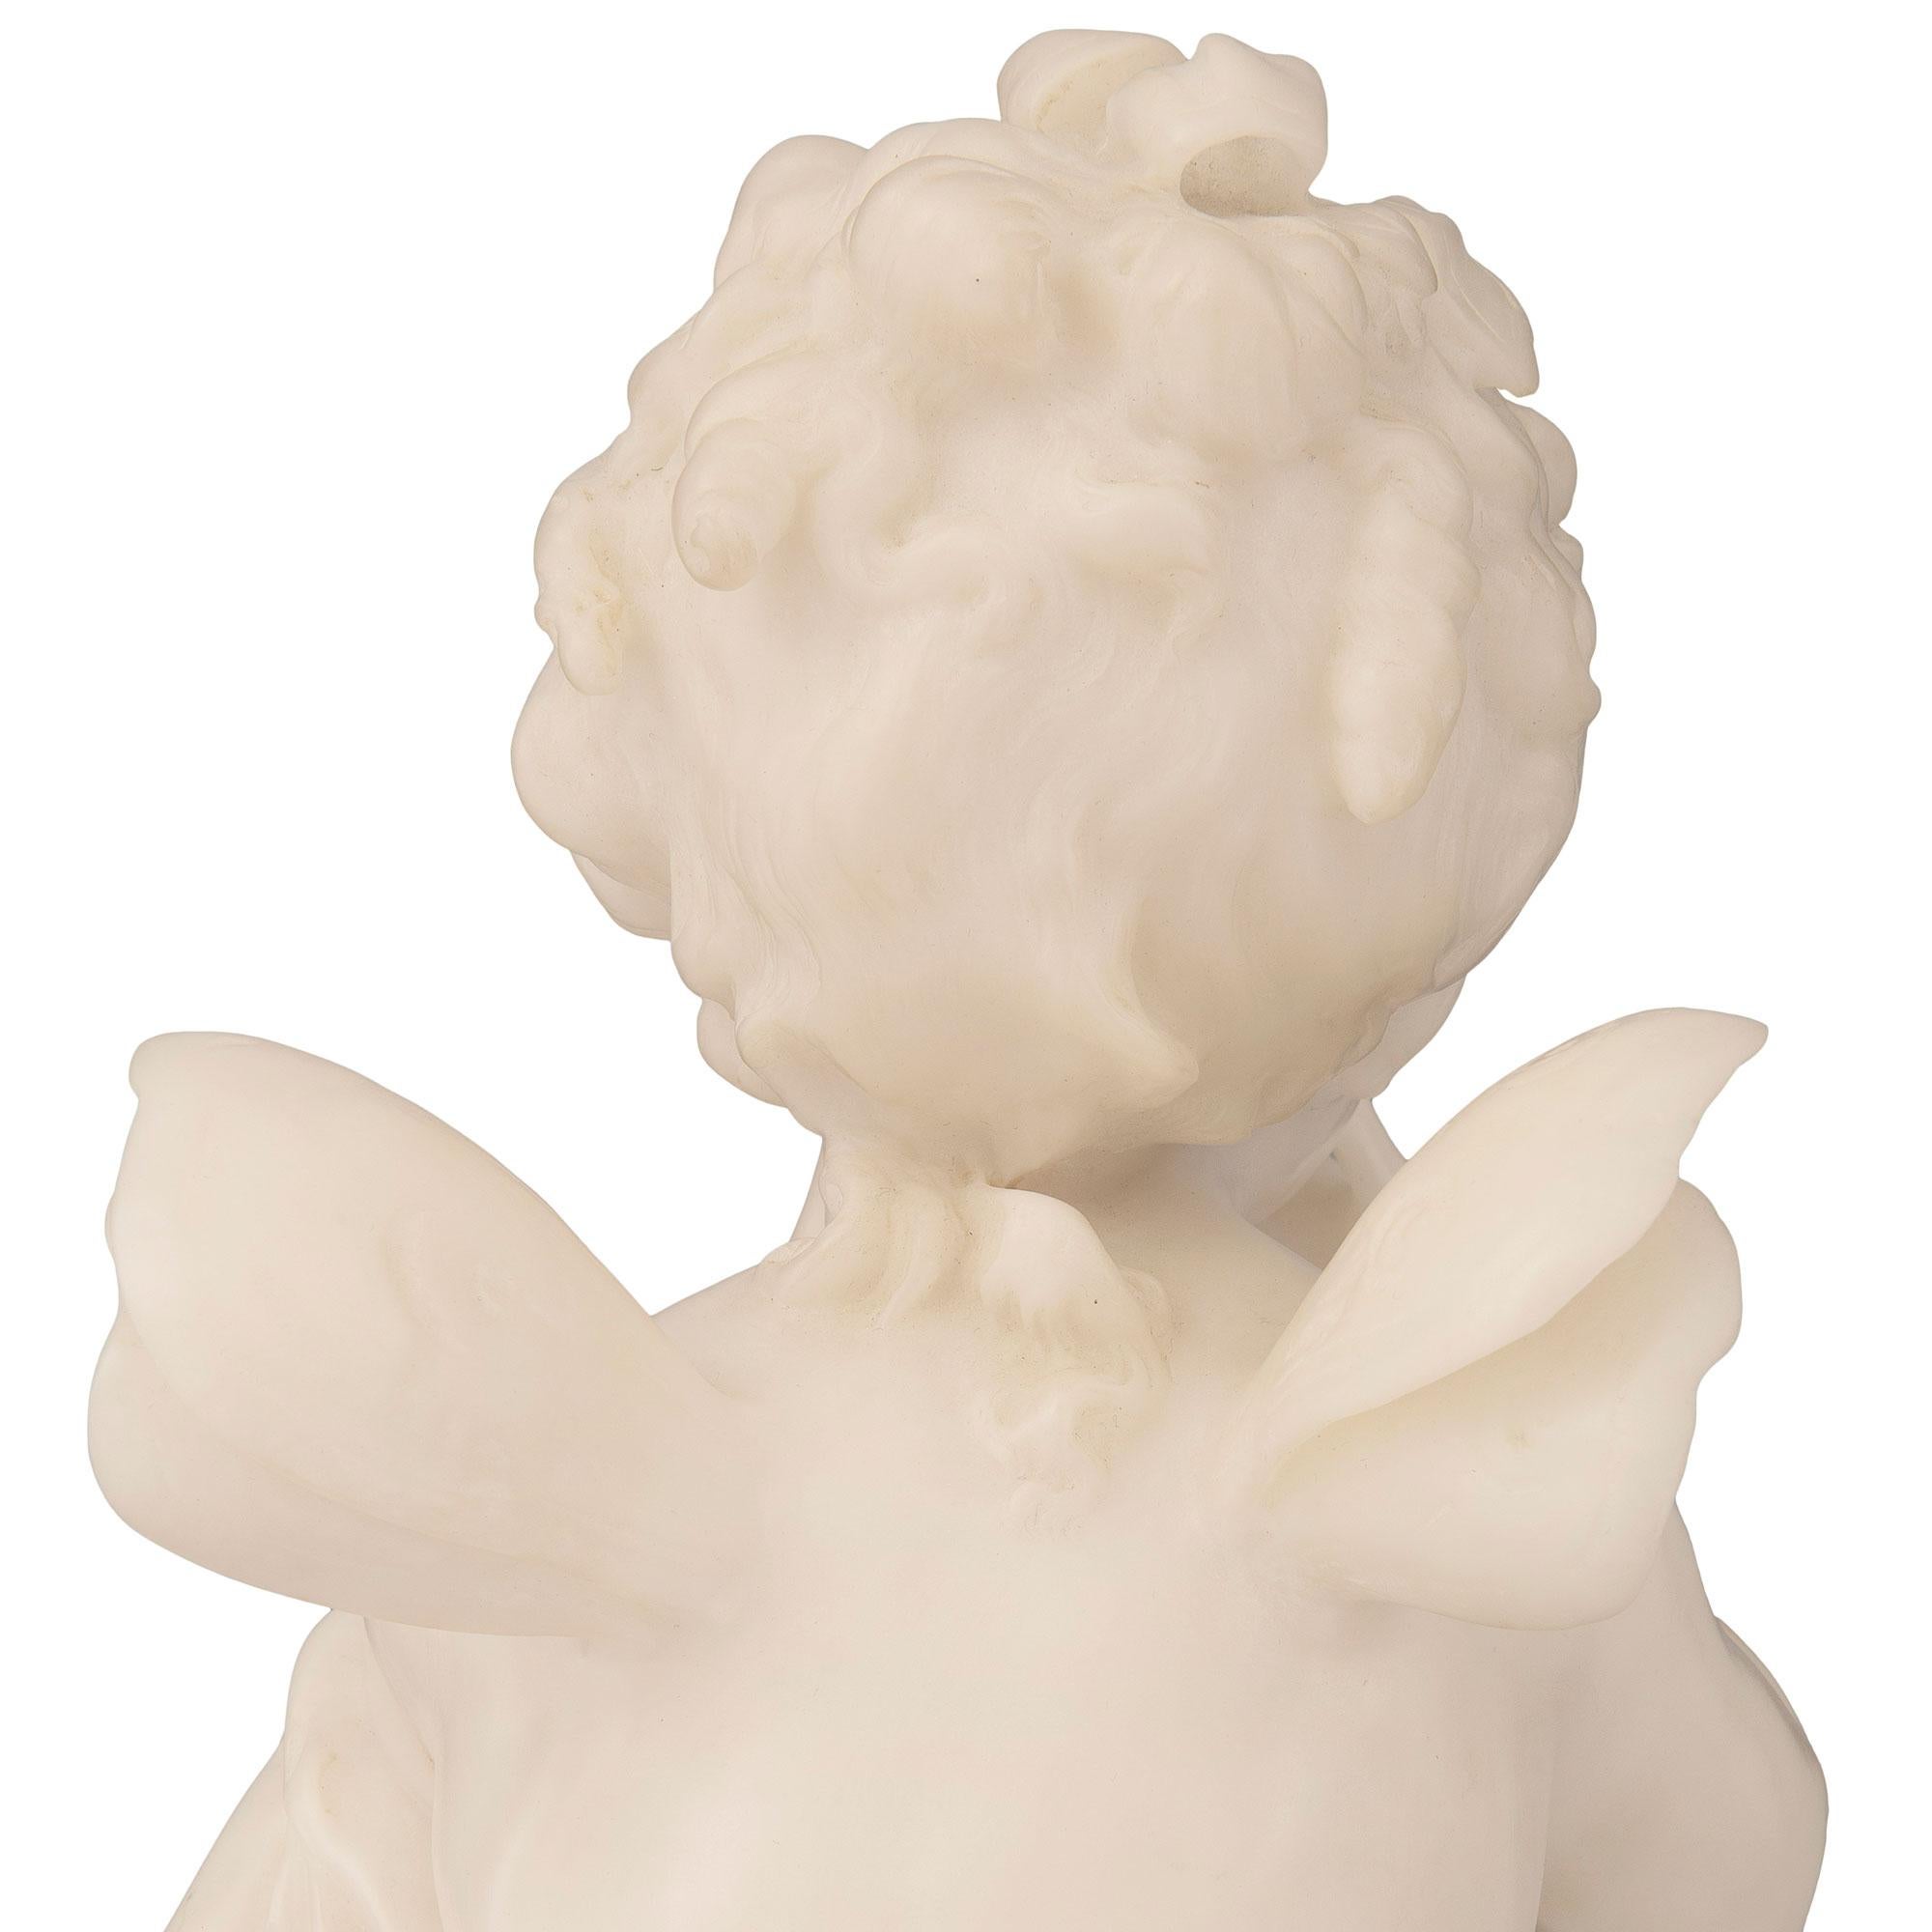 Italian Mid-19th Century White Carrara Marble Statue of Winged Girl For Sale 3